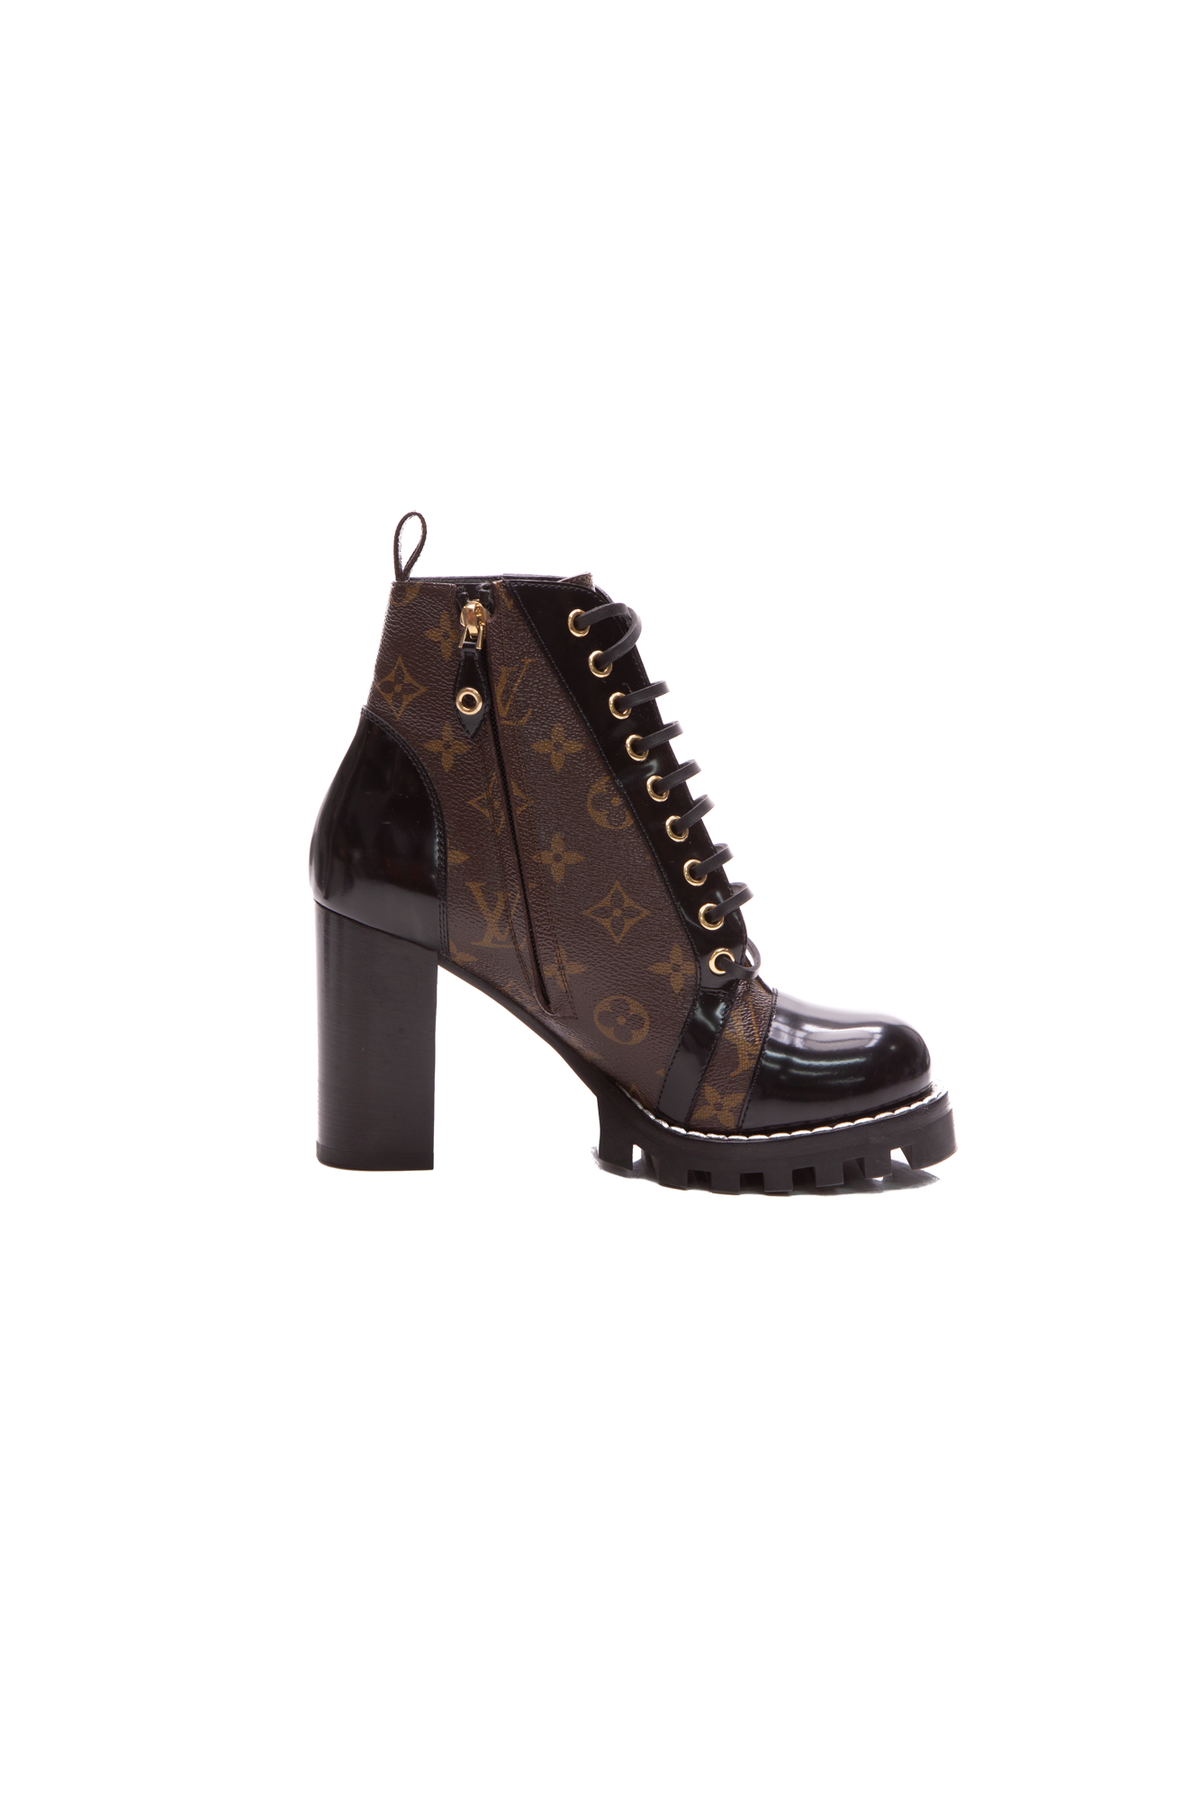 LOUIS VUITTON, ankle boots, Janet, monogram and black leather